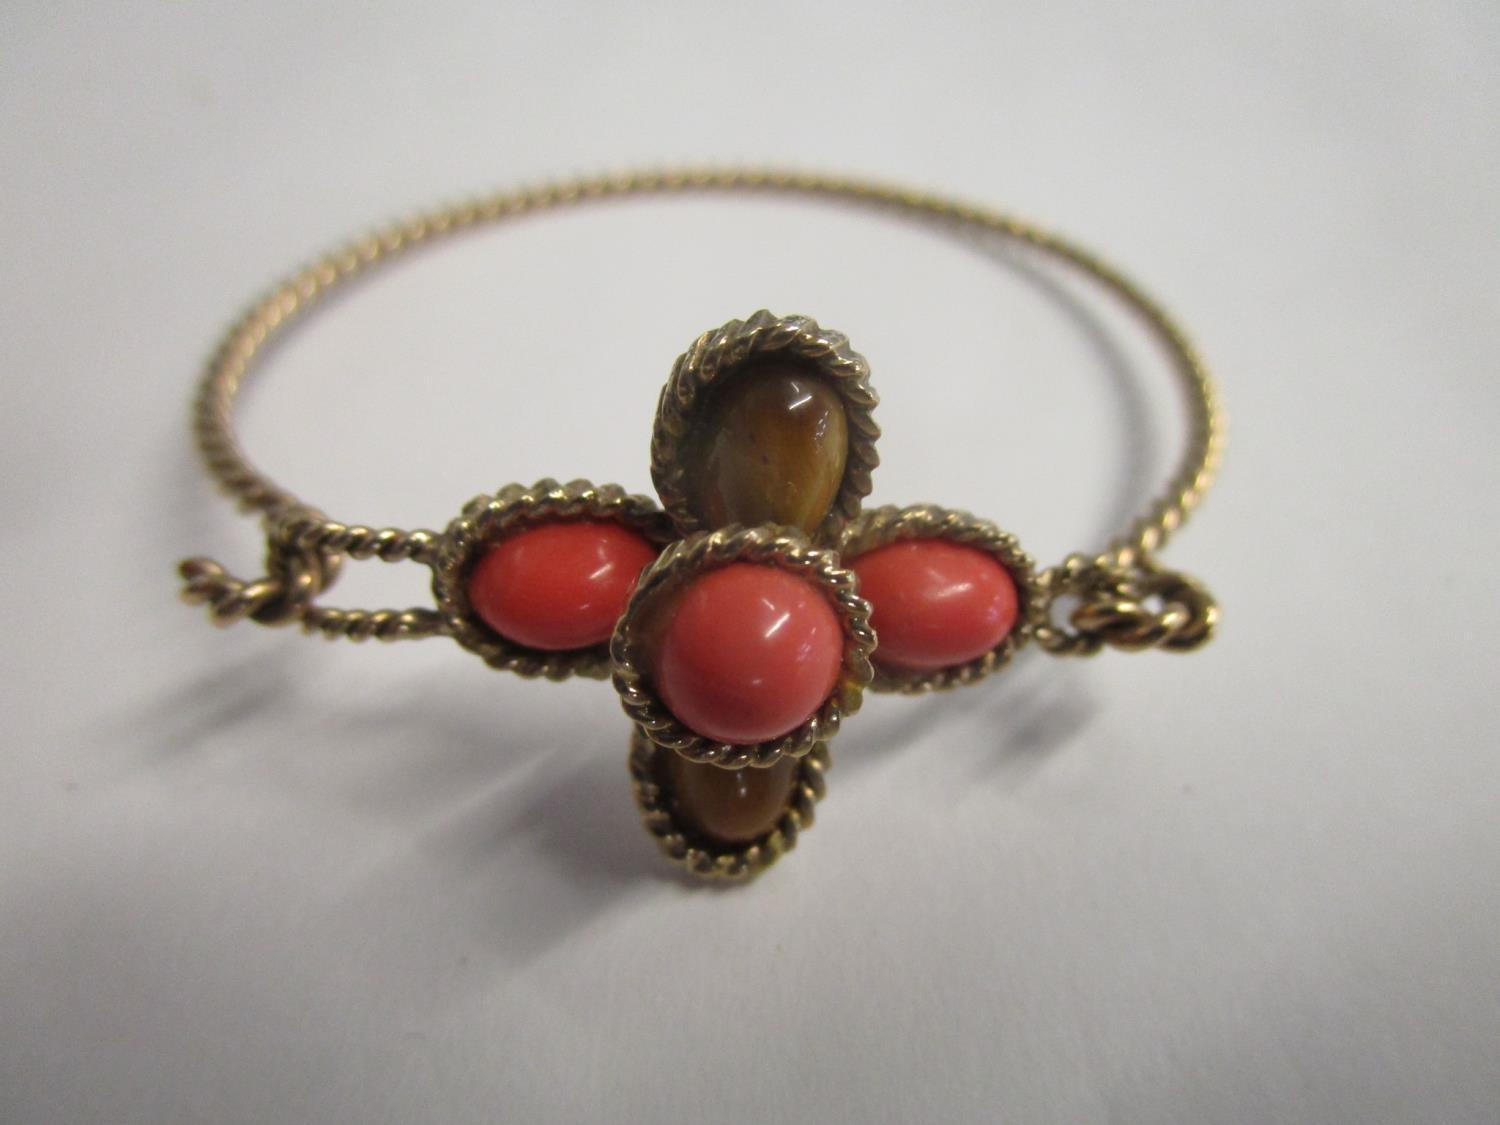 A 9ct yellow gold rope twist bracelet set with tigers eye and coral coloured stones in a cross